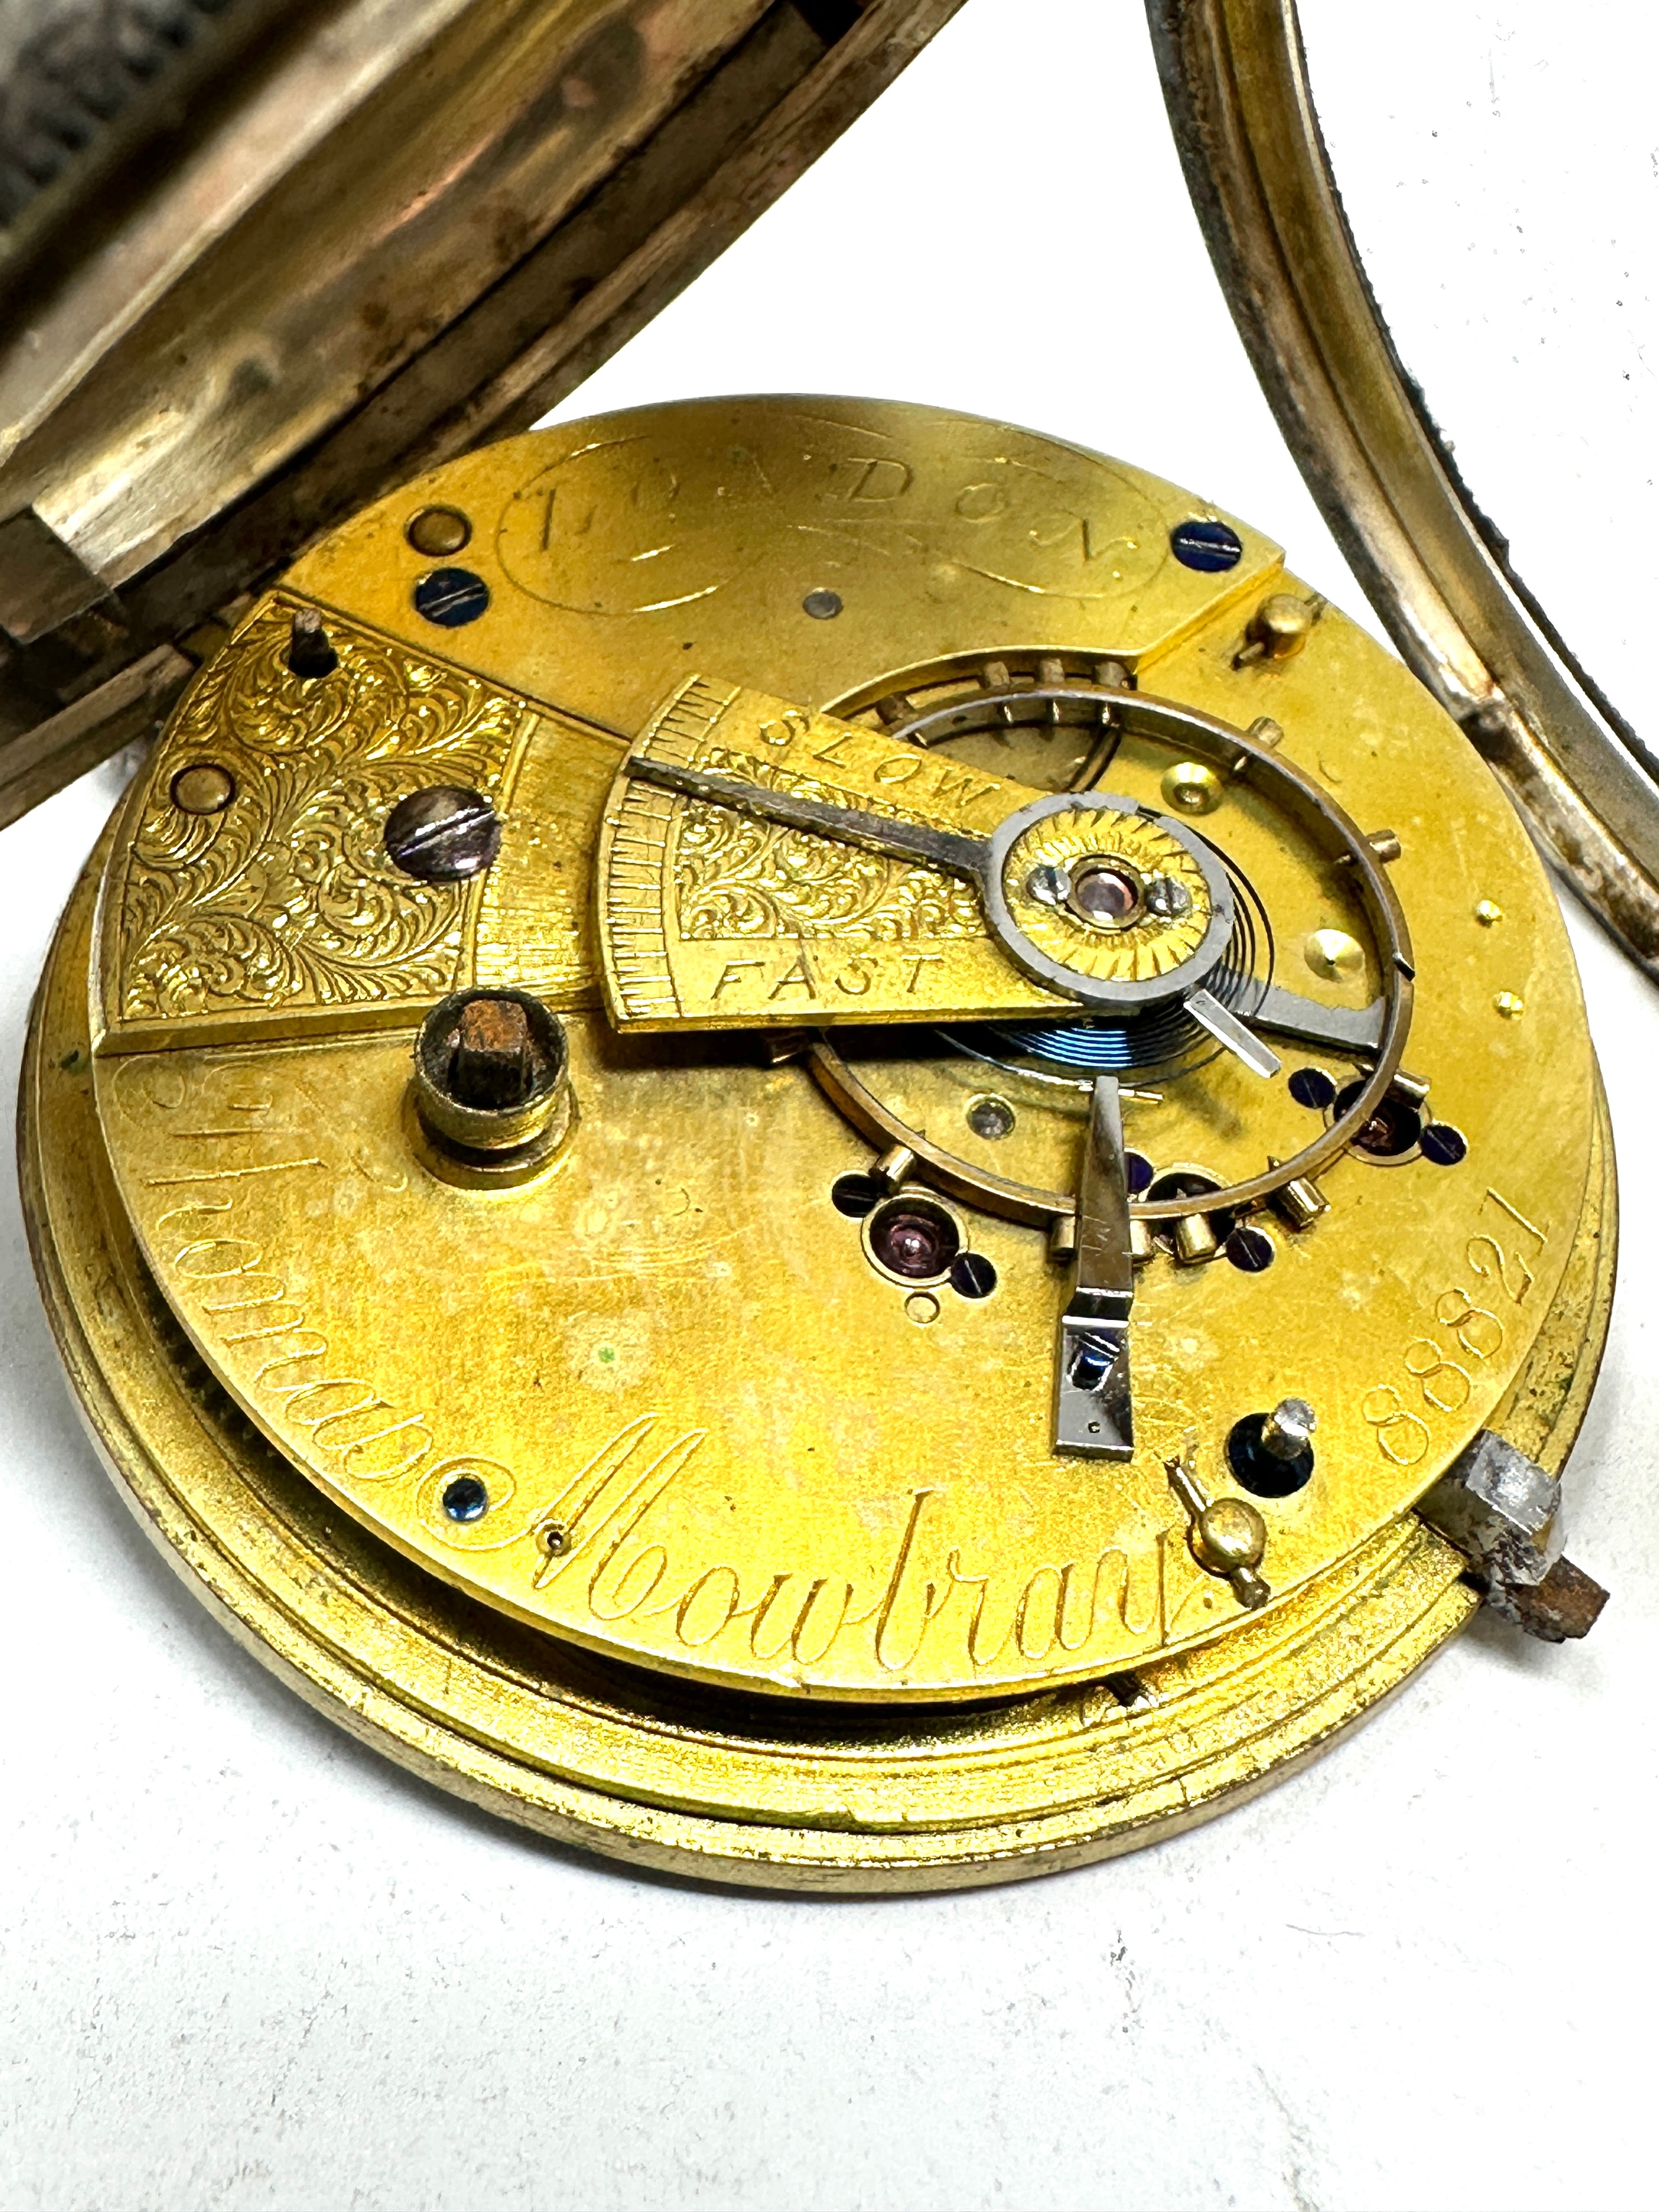 Antique silver dial open face fusee pocket watch thomas mowbray london movement the watch is ticking - Image 5 of 5